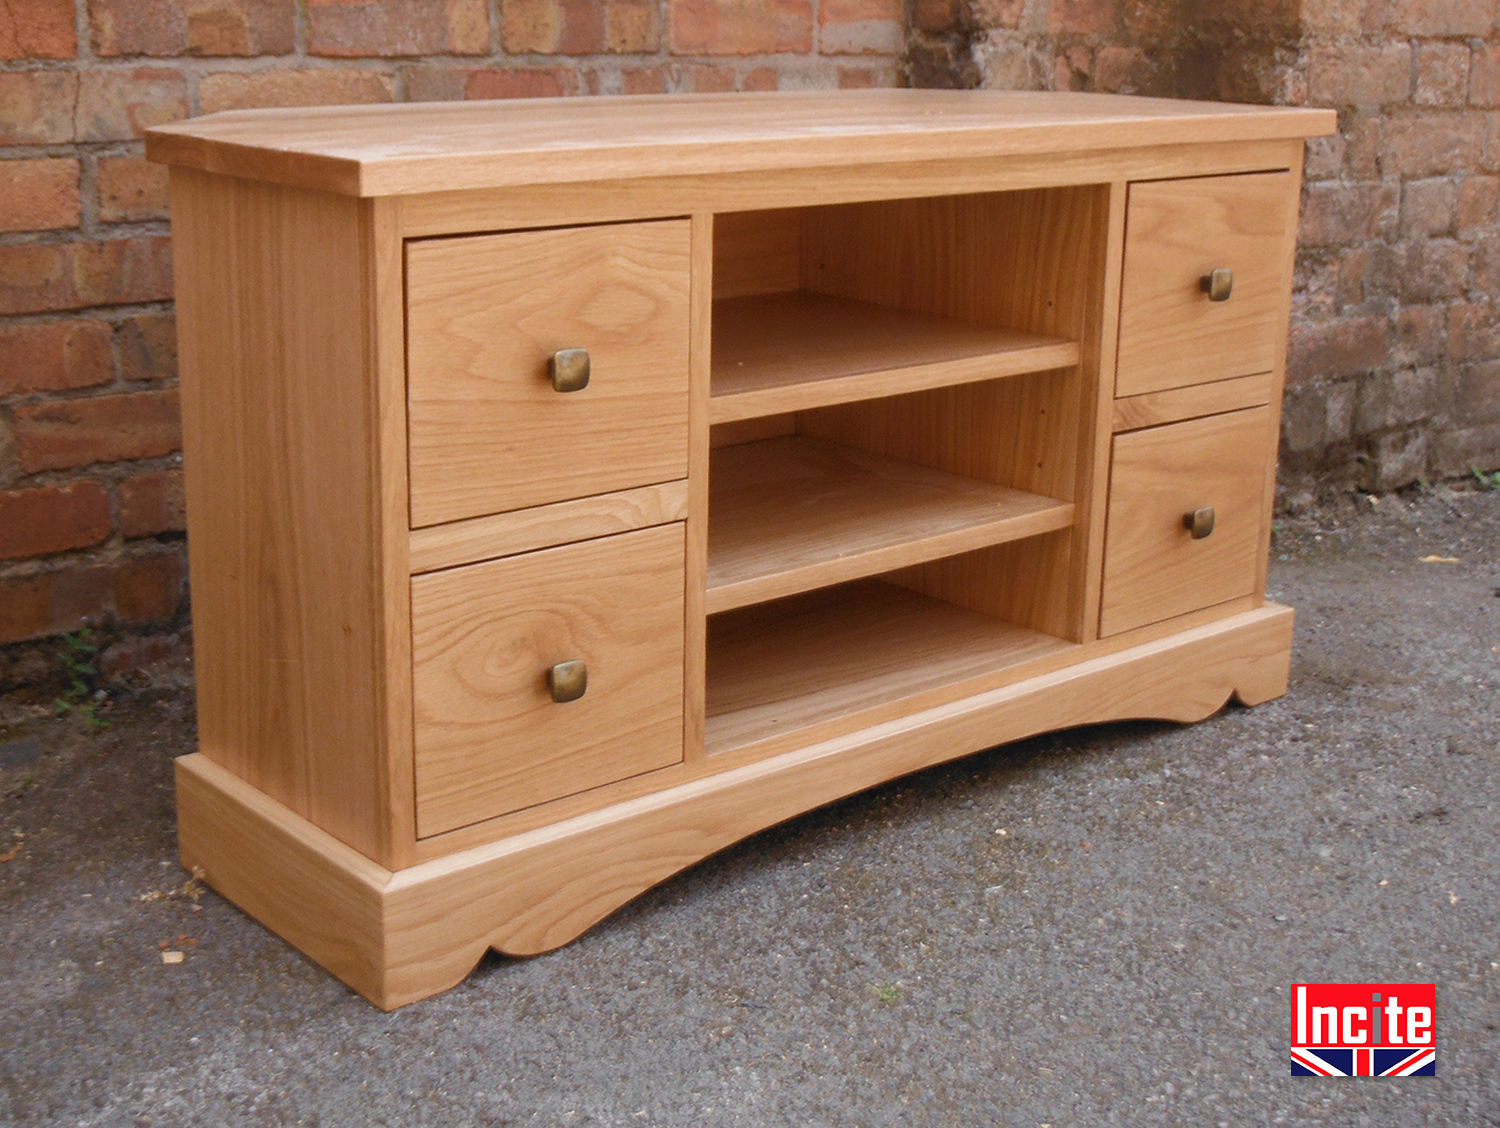 Made To Measure Oak Television Cabinets By Incite Derby